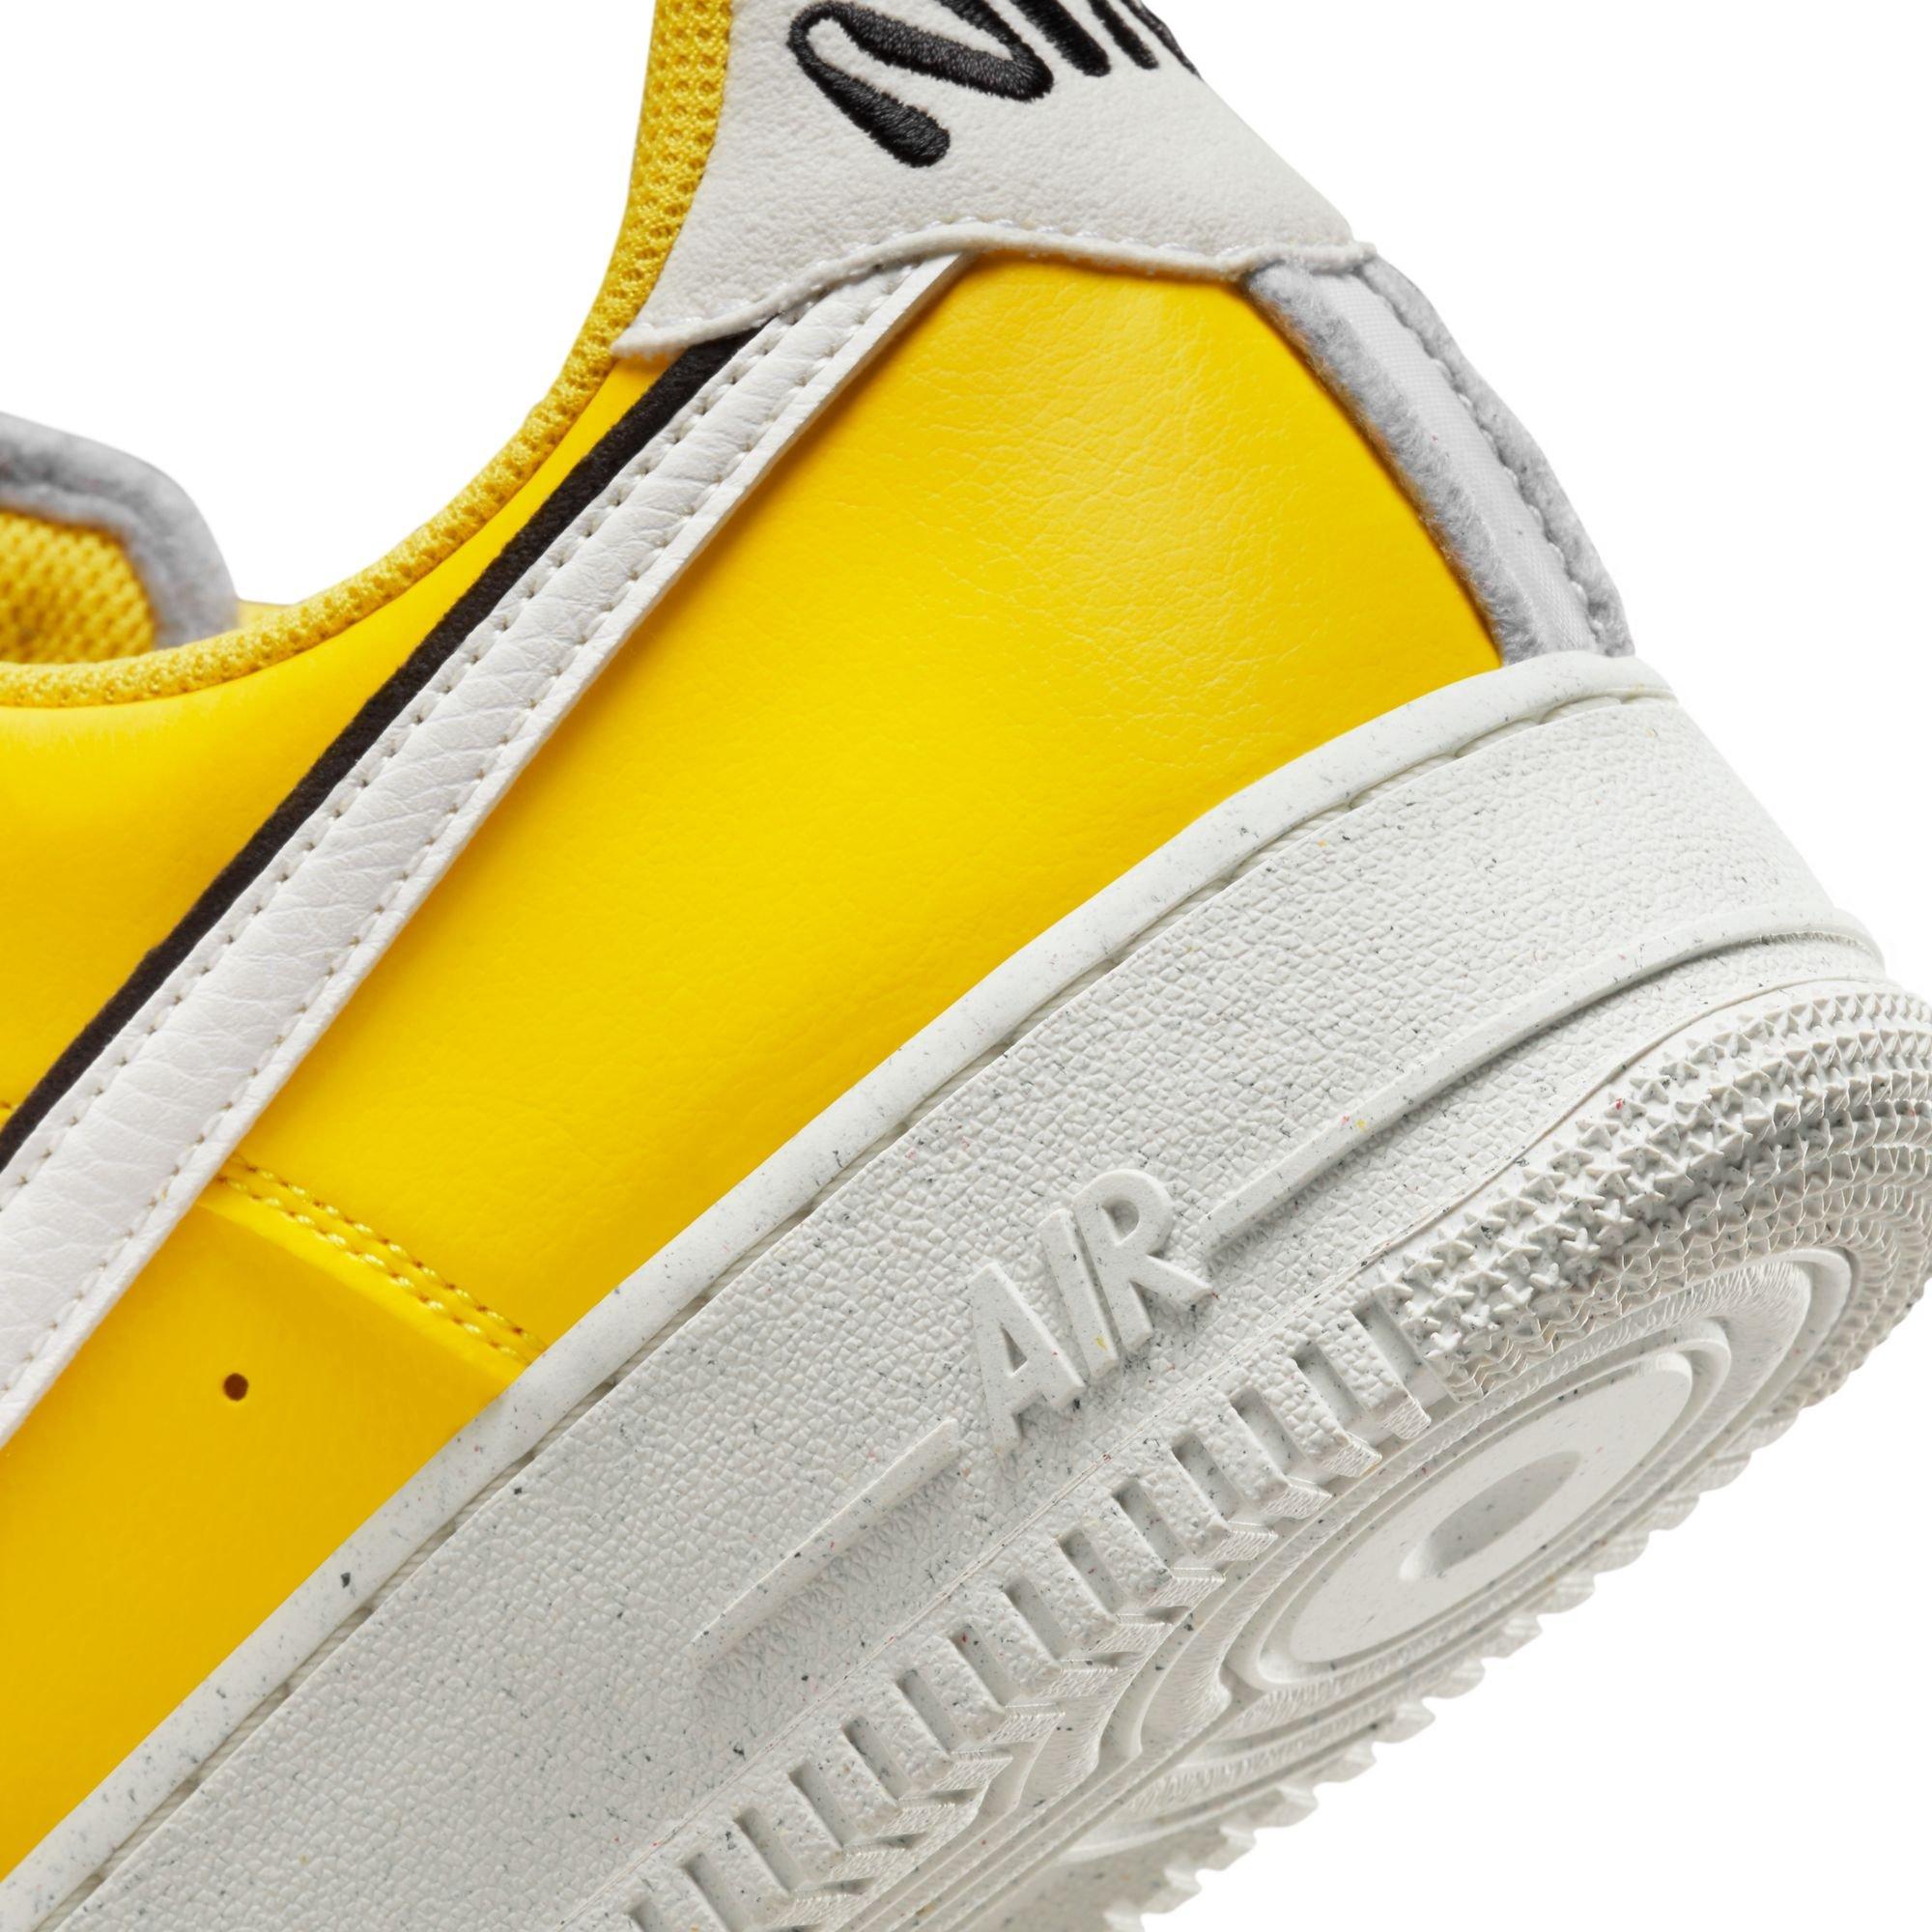 Yellow Air Force 1 Shoes. Nike HR